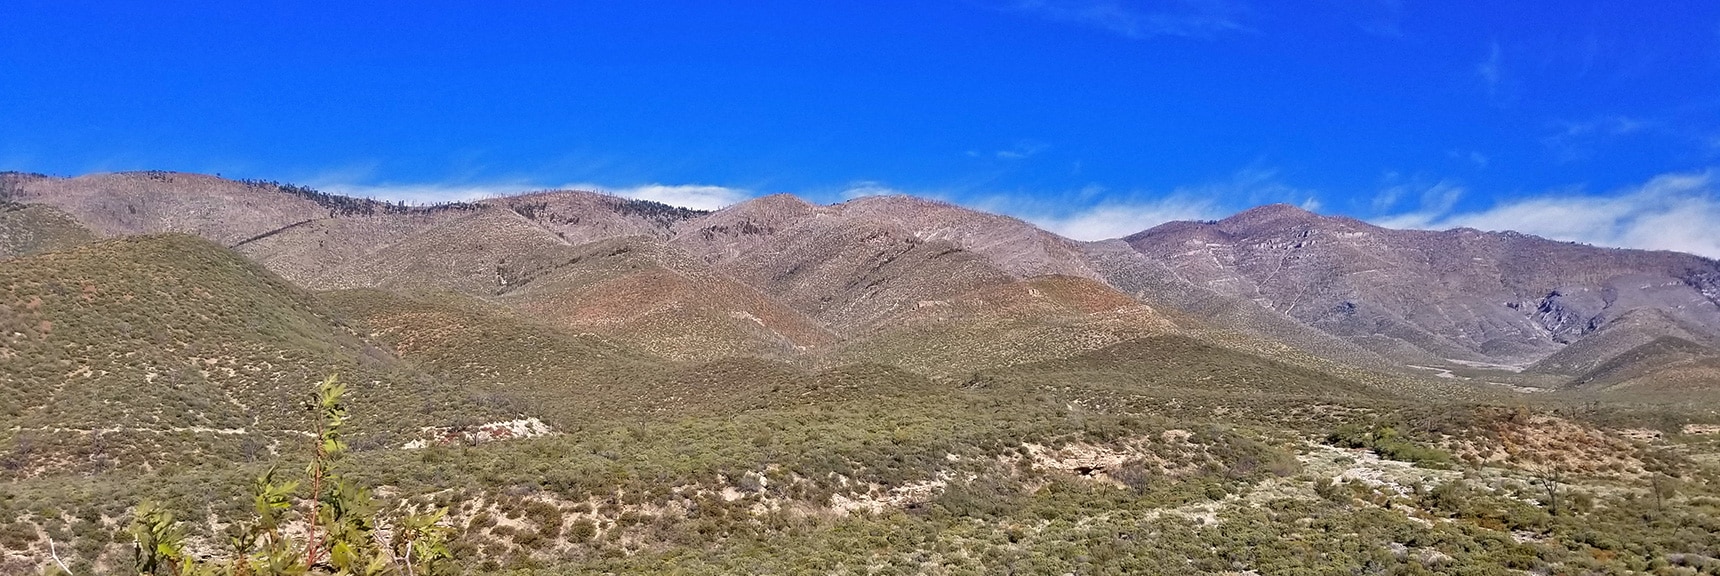 View Across Lovell Canyon to Sexton Ridge and Griffith Peak | Harris Mountain from Lovell Canyon Nevada